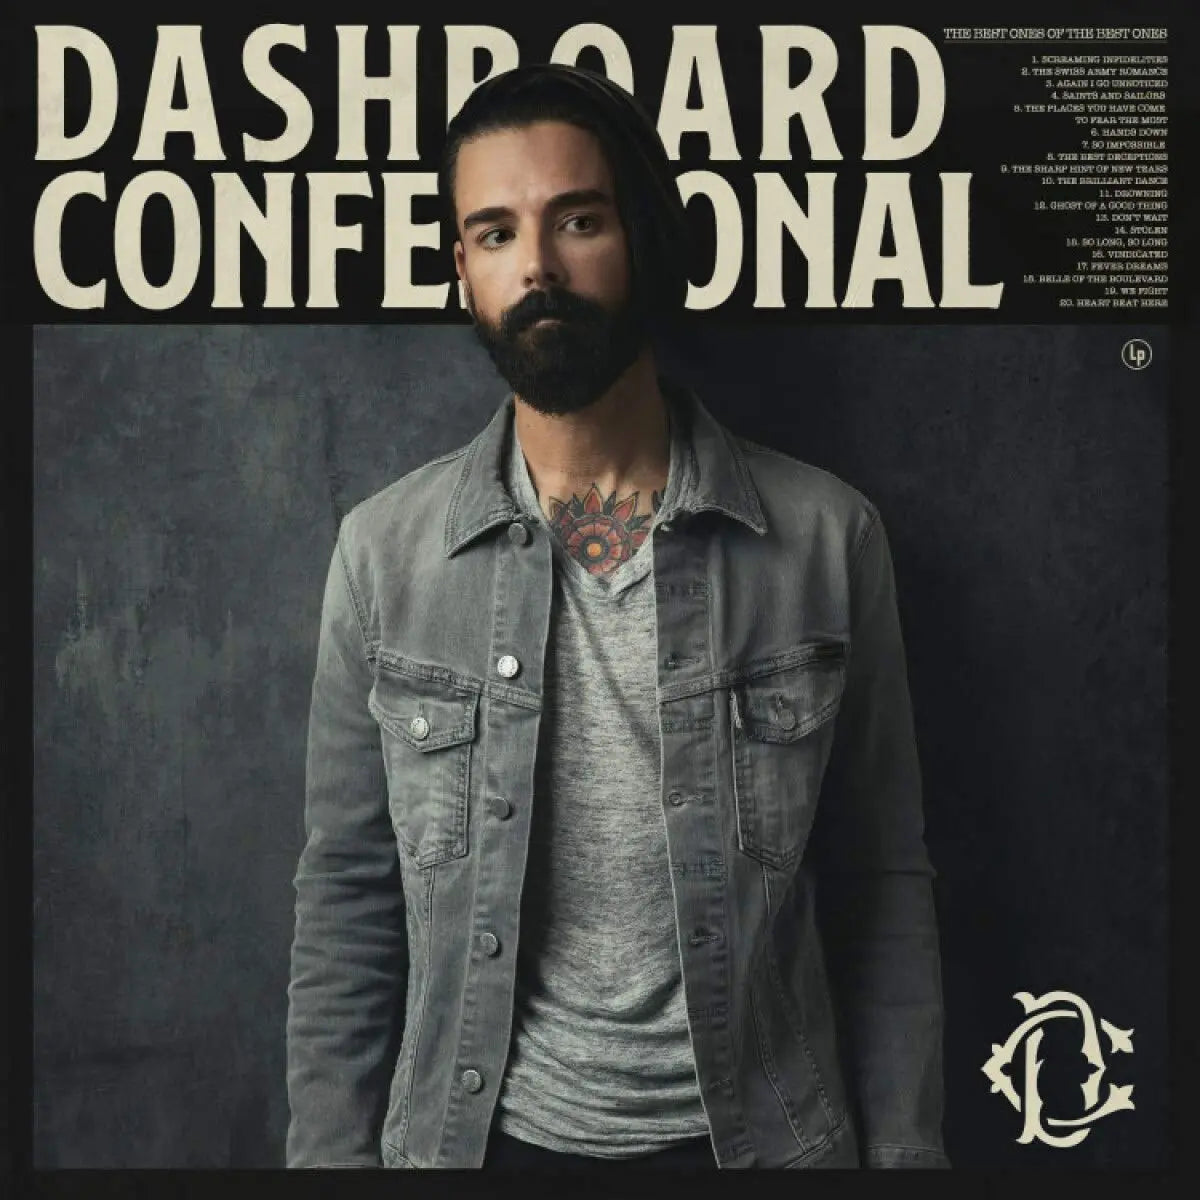 Dashboard Confessional - The Best Ones Of The Best Ones [Limited Edition, Cream Colored Vinyl]